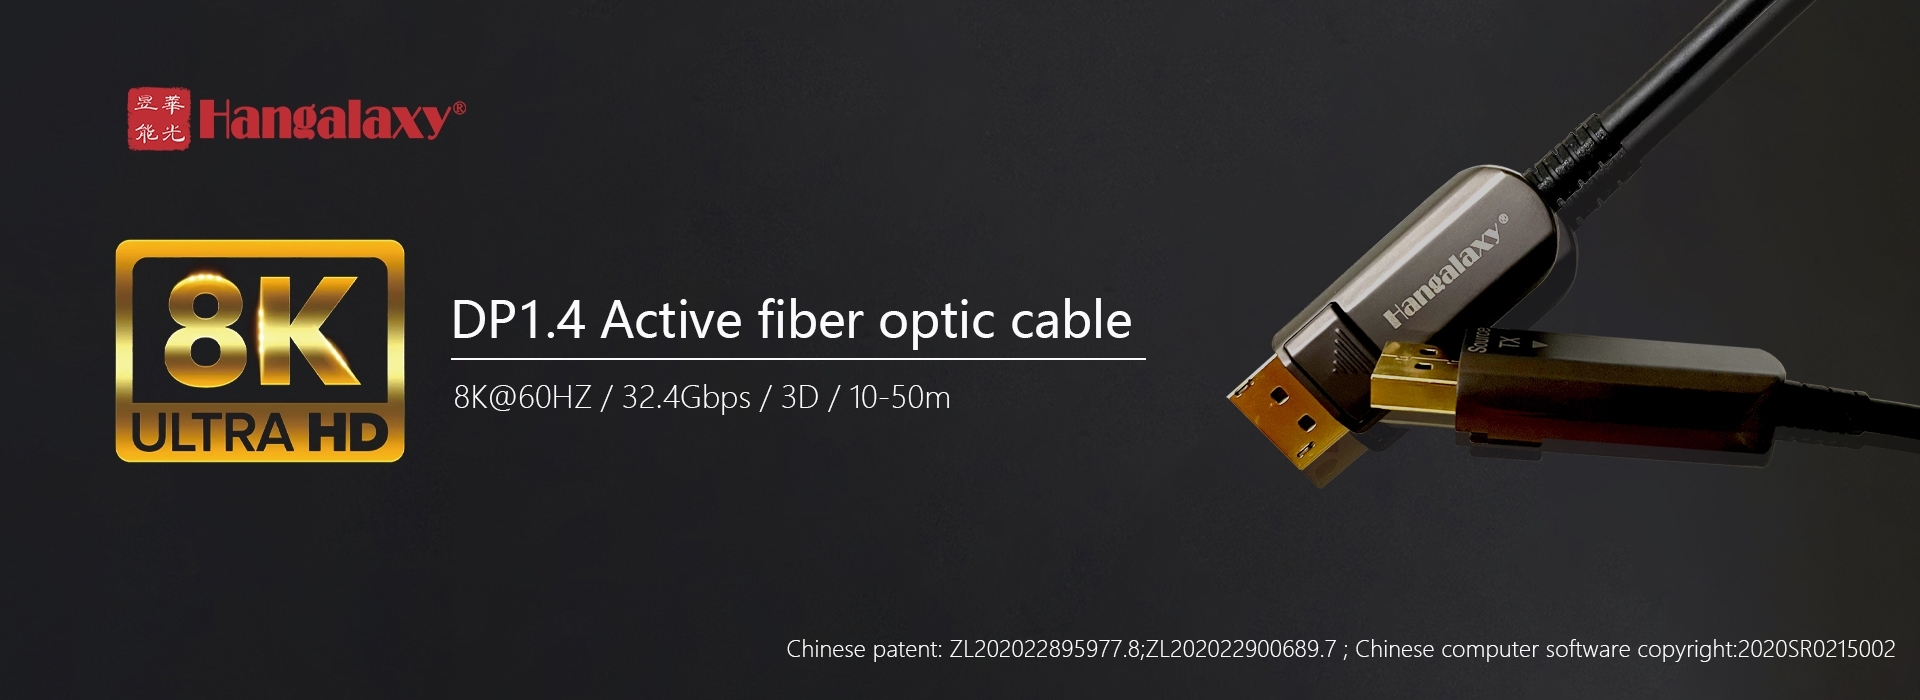 DP1.4 Active Optical Cable